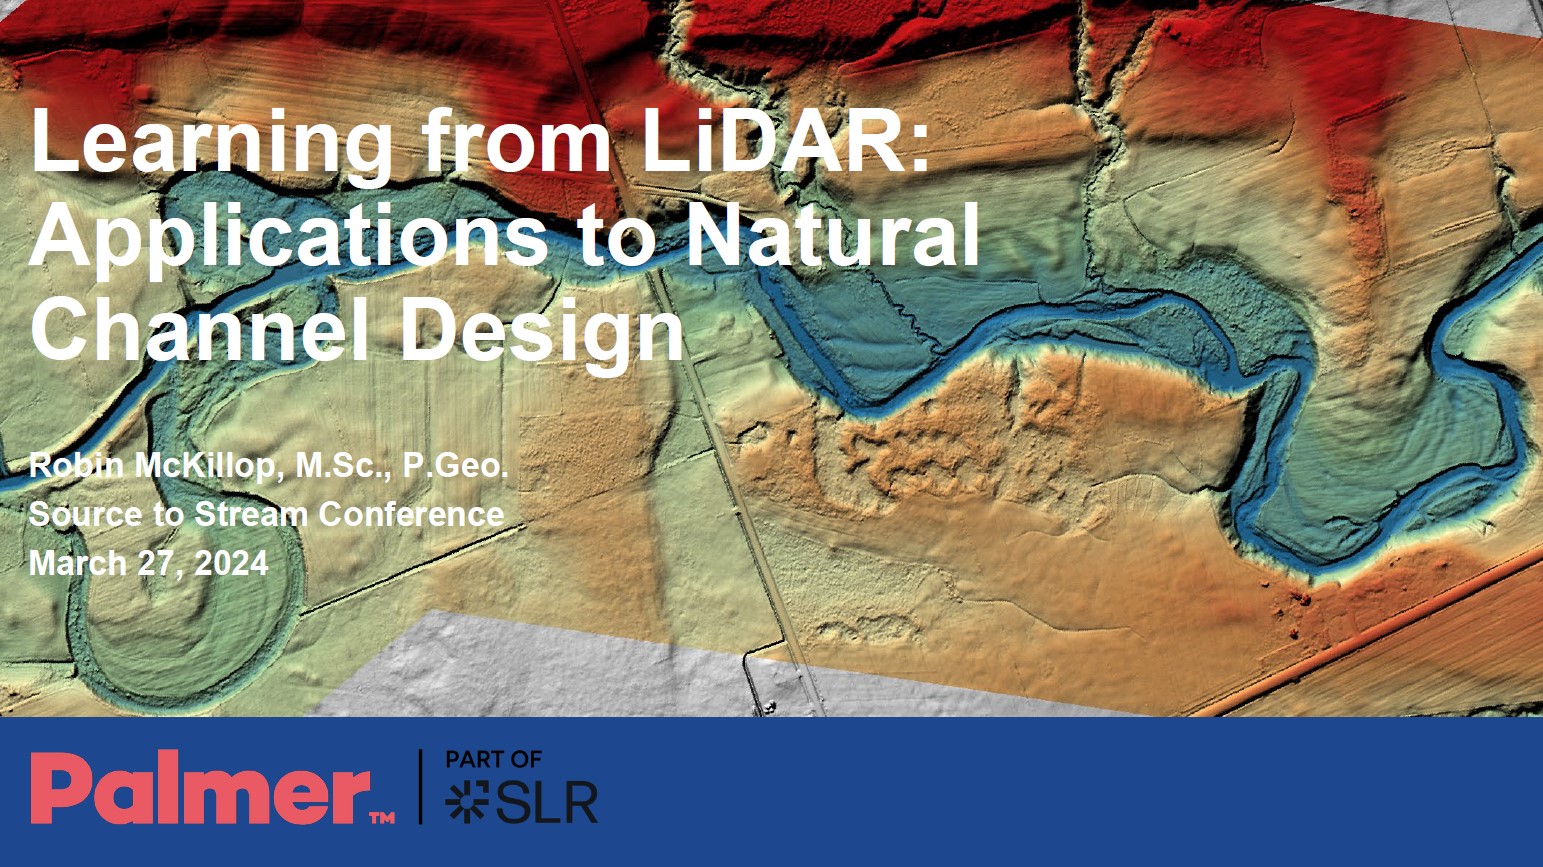 Learning from LiDAR: Applications to Natural Channel Design - presentation by Robin McKillop